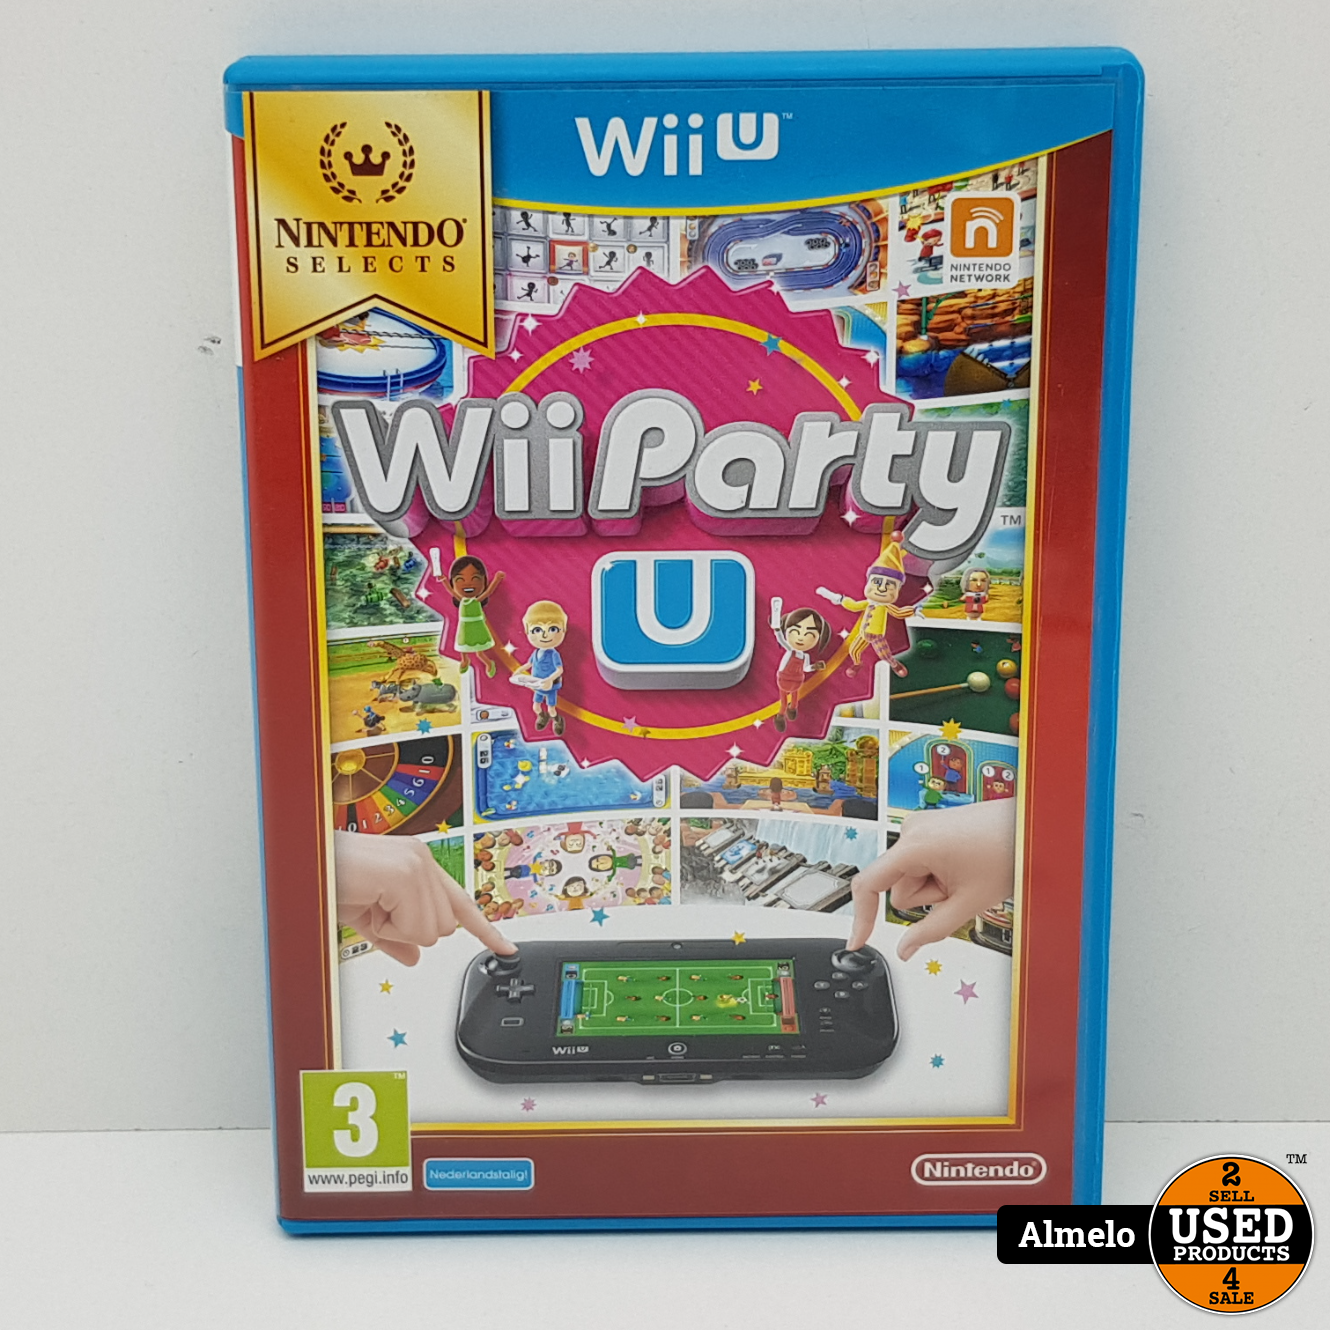 Druipend maximaal Geef energie Nintendo Wii U Wii Party - Used Products Almelo